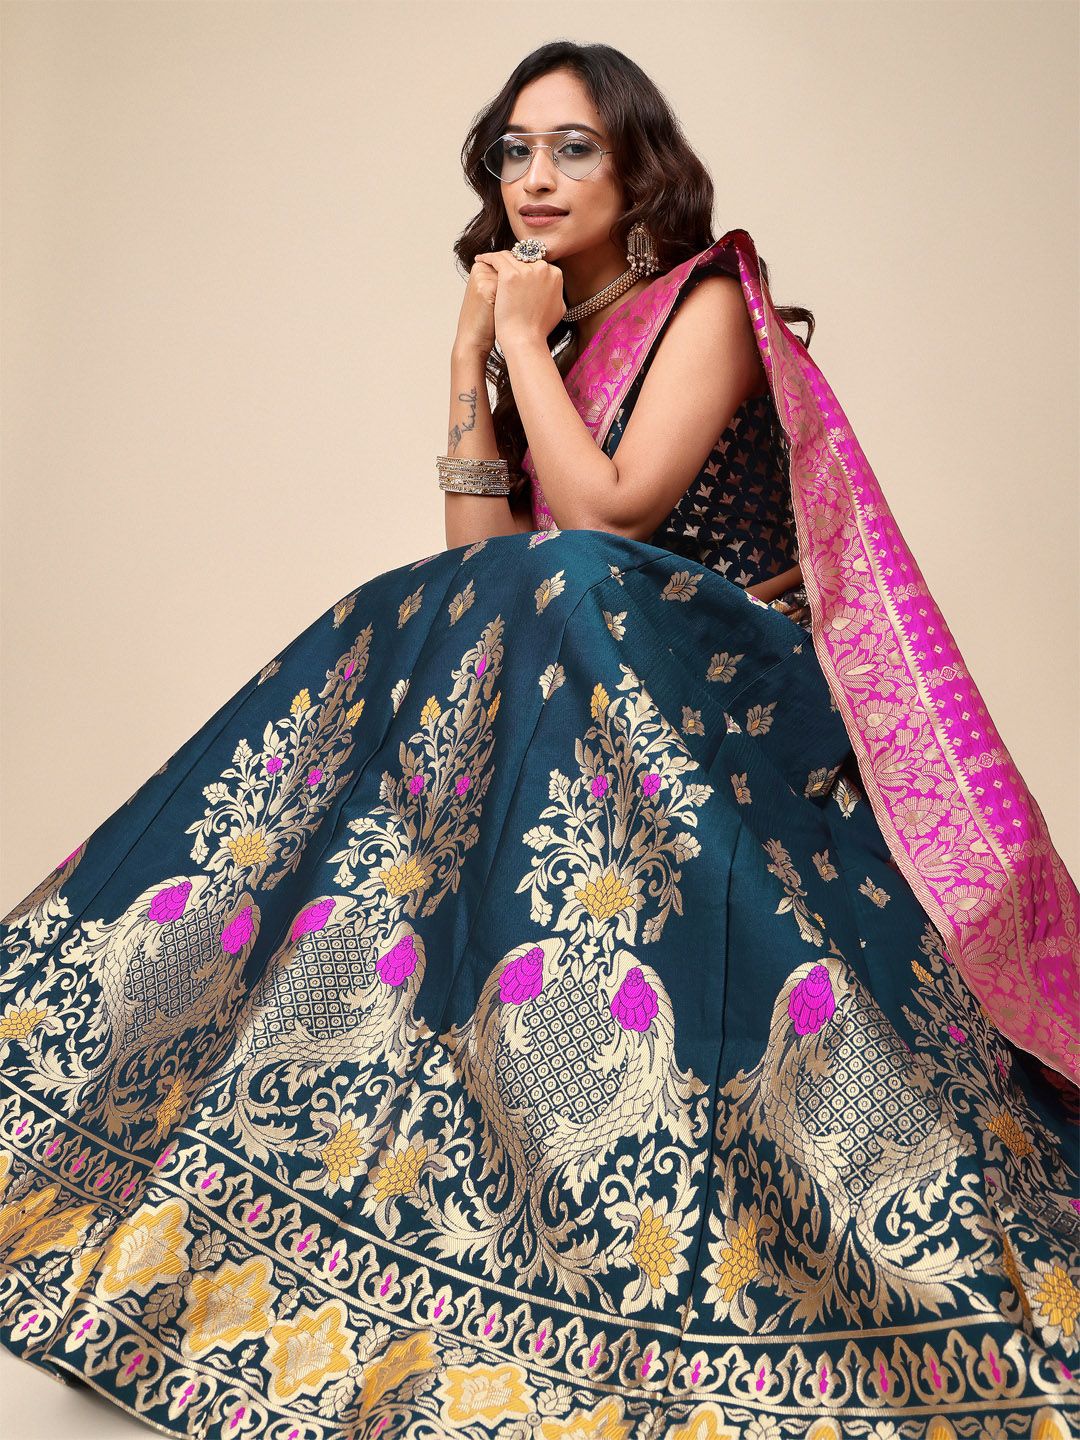 PURVAJA Woven Design Ready to Wear Lehenga & Unstitched Blouse With Dupatta Price in India